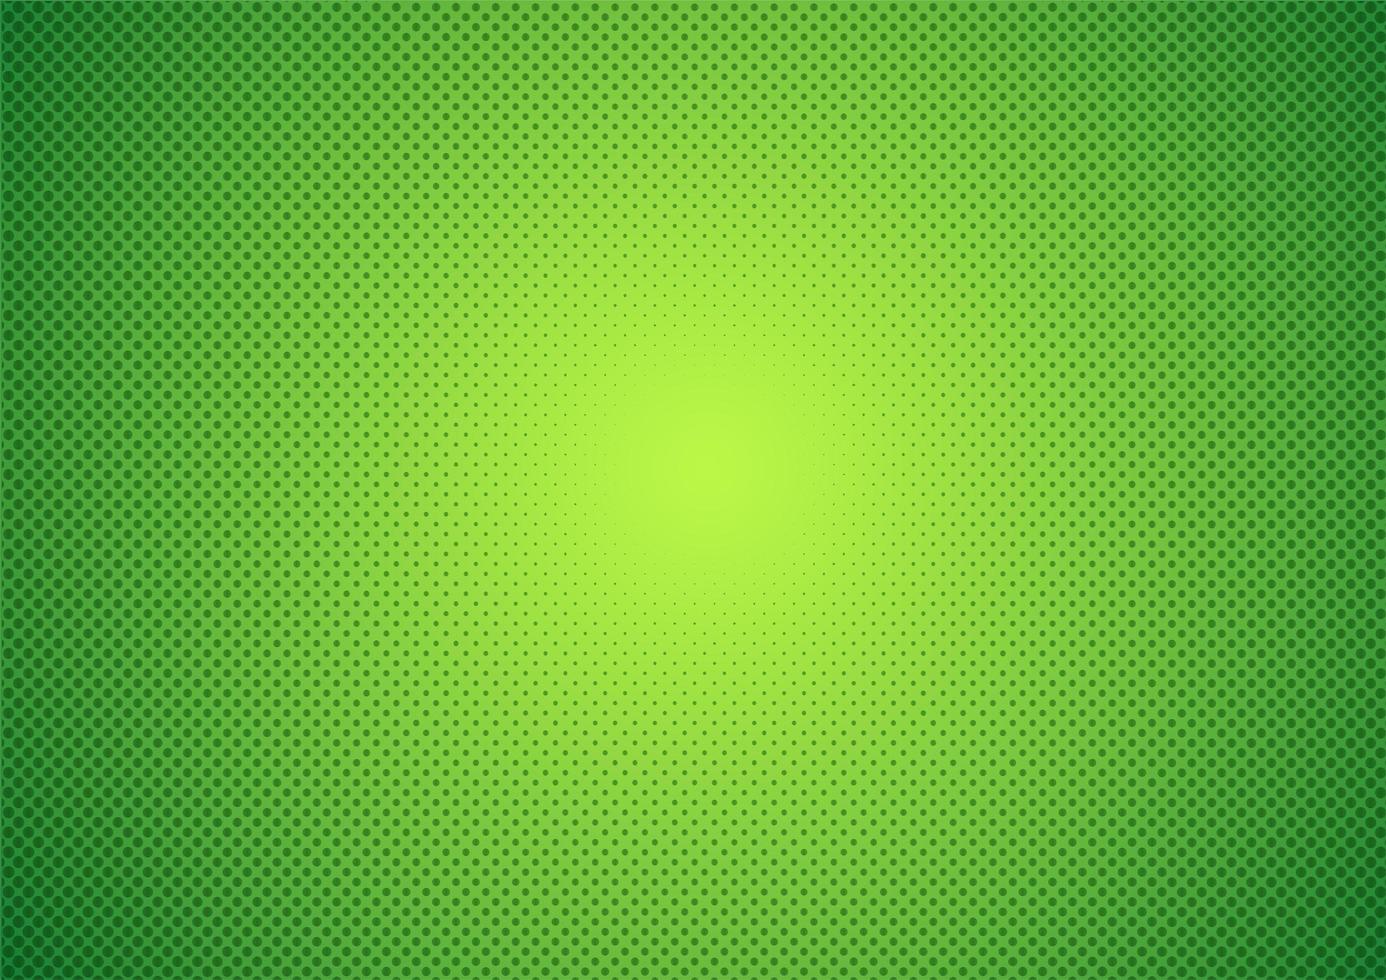 Green Gradient with Halftone background vector